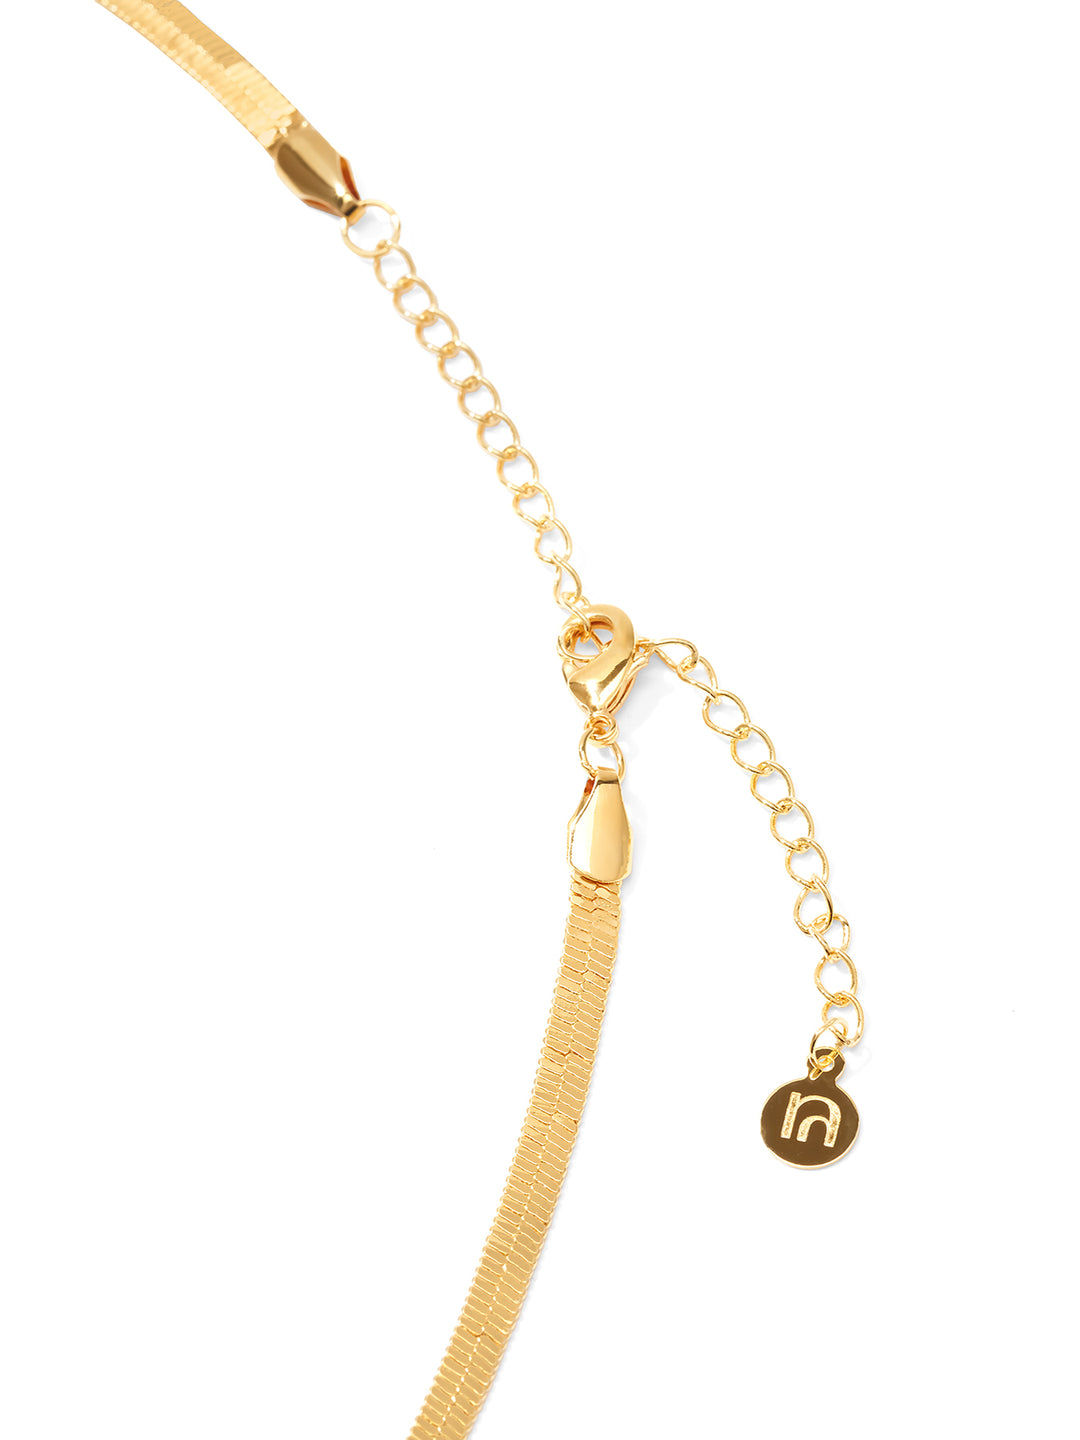 SNAKE CHAIN • Color: 18K Yellow Gold